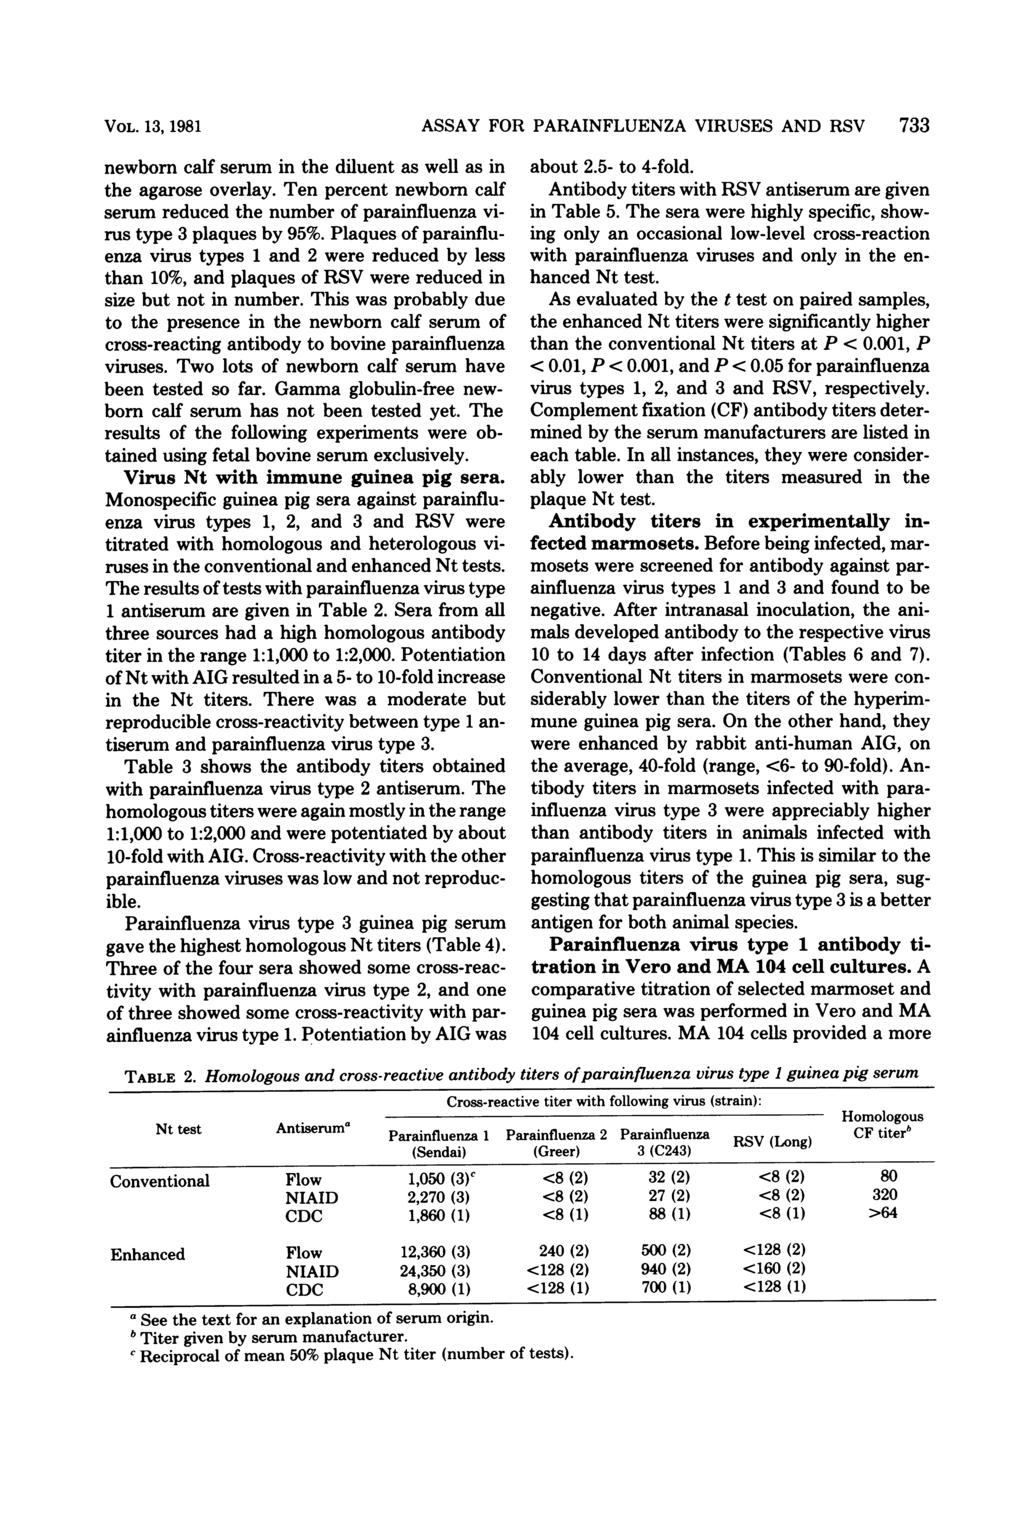 VOL. 13, 1981 newborn calf serum in the diluent as well as in the agarose overlay. Ten percent newborn calf serum reduced the number of parainfluenza virus type 3 plaques by 95%.